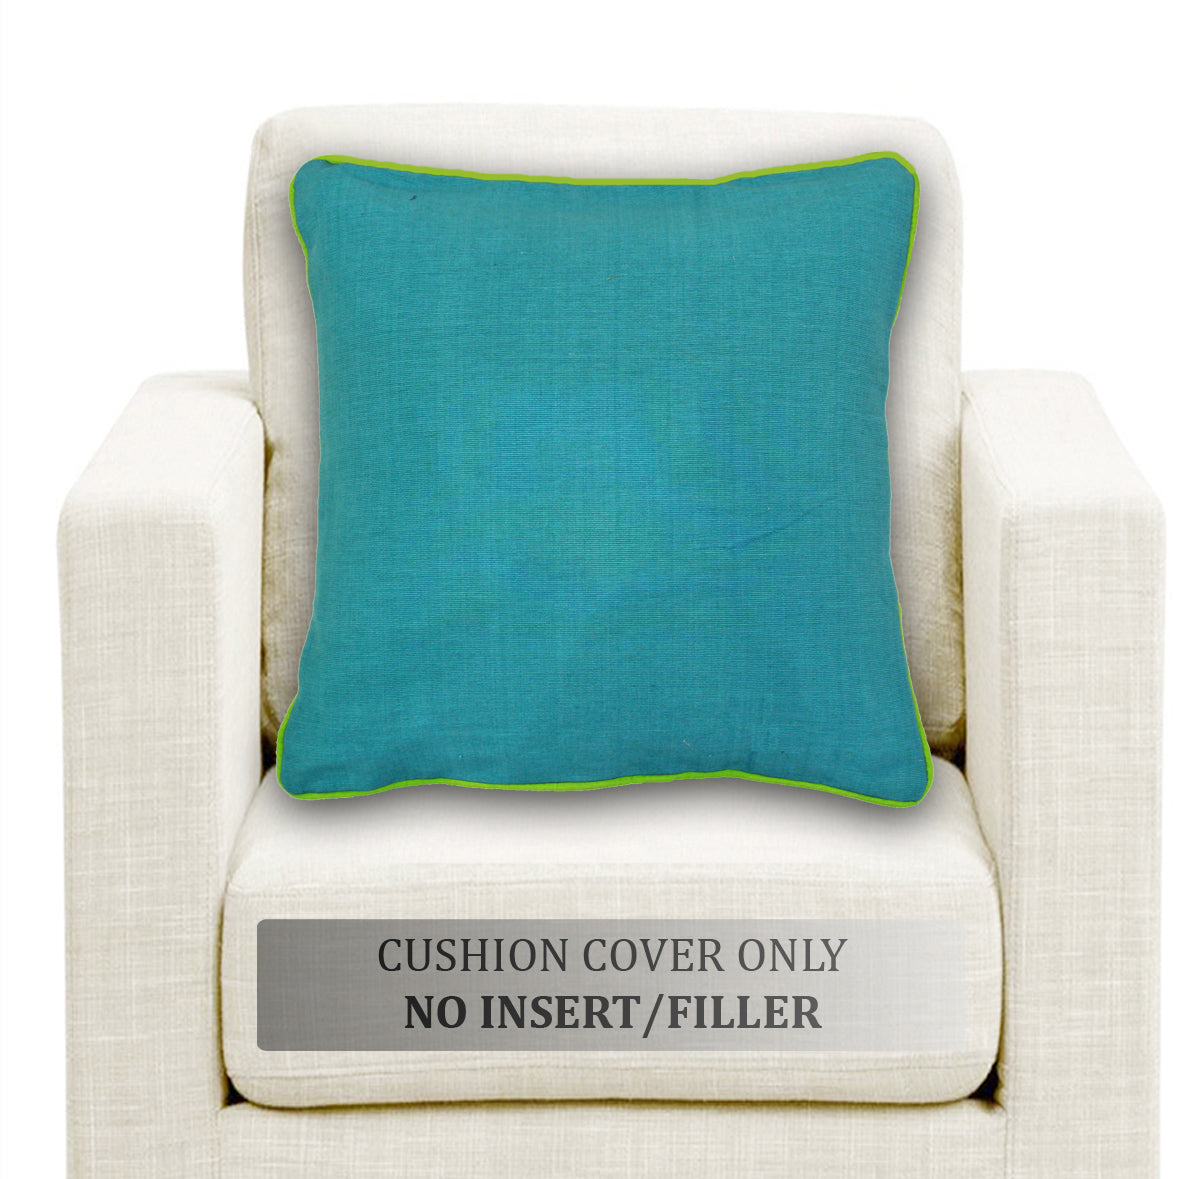 Soft Woven Corded Stripe Cotton Cushion Cover Set in Peacock Blue online (1Pc)